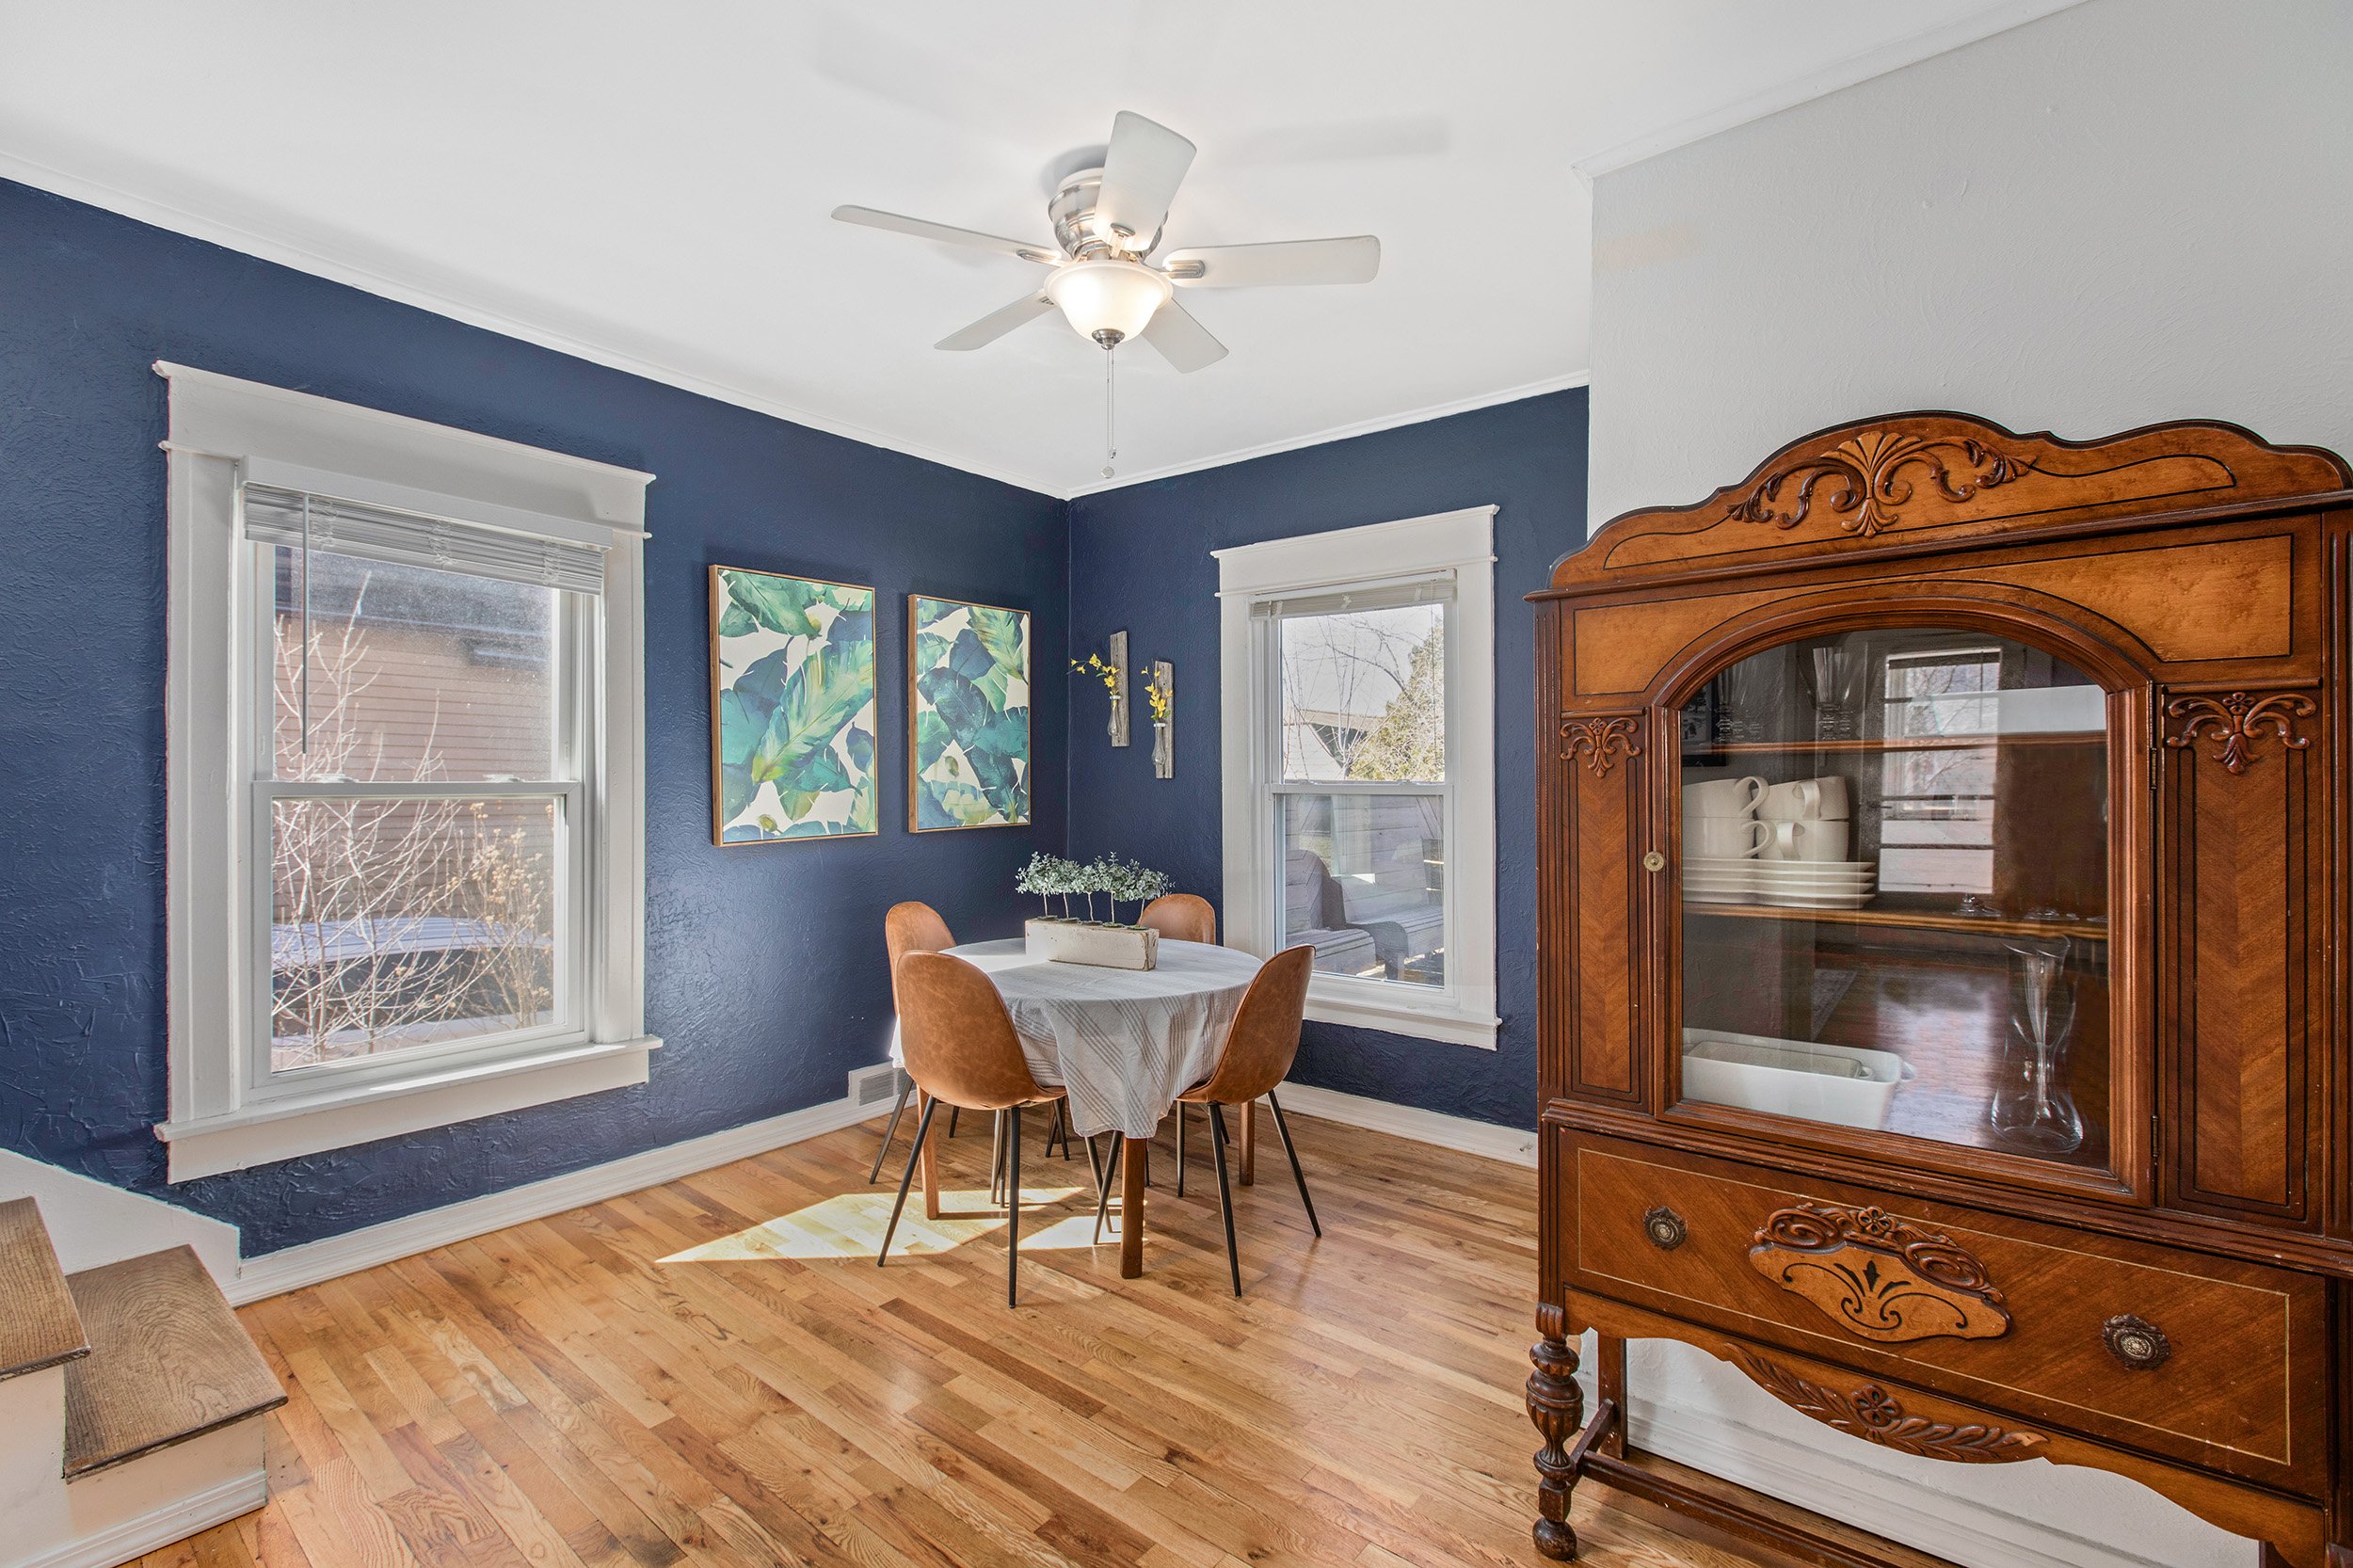  Holly, MI Real Estate Photography - Charming 1920’s bungalow - dining room 